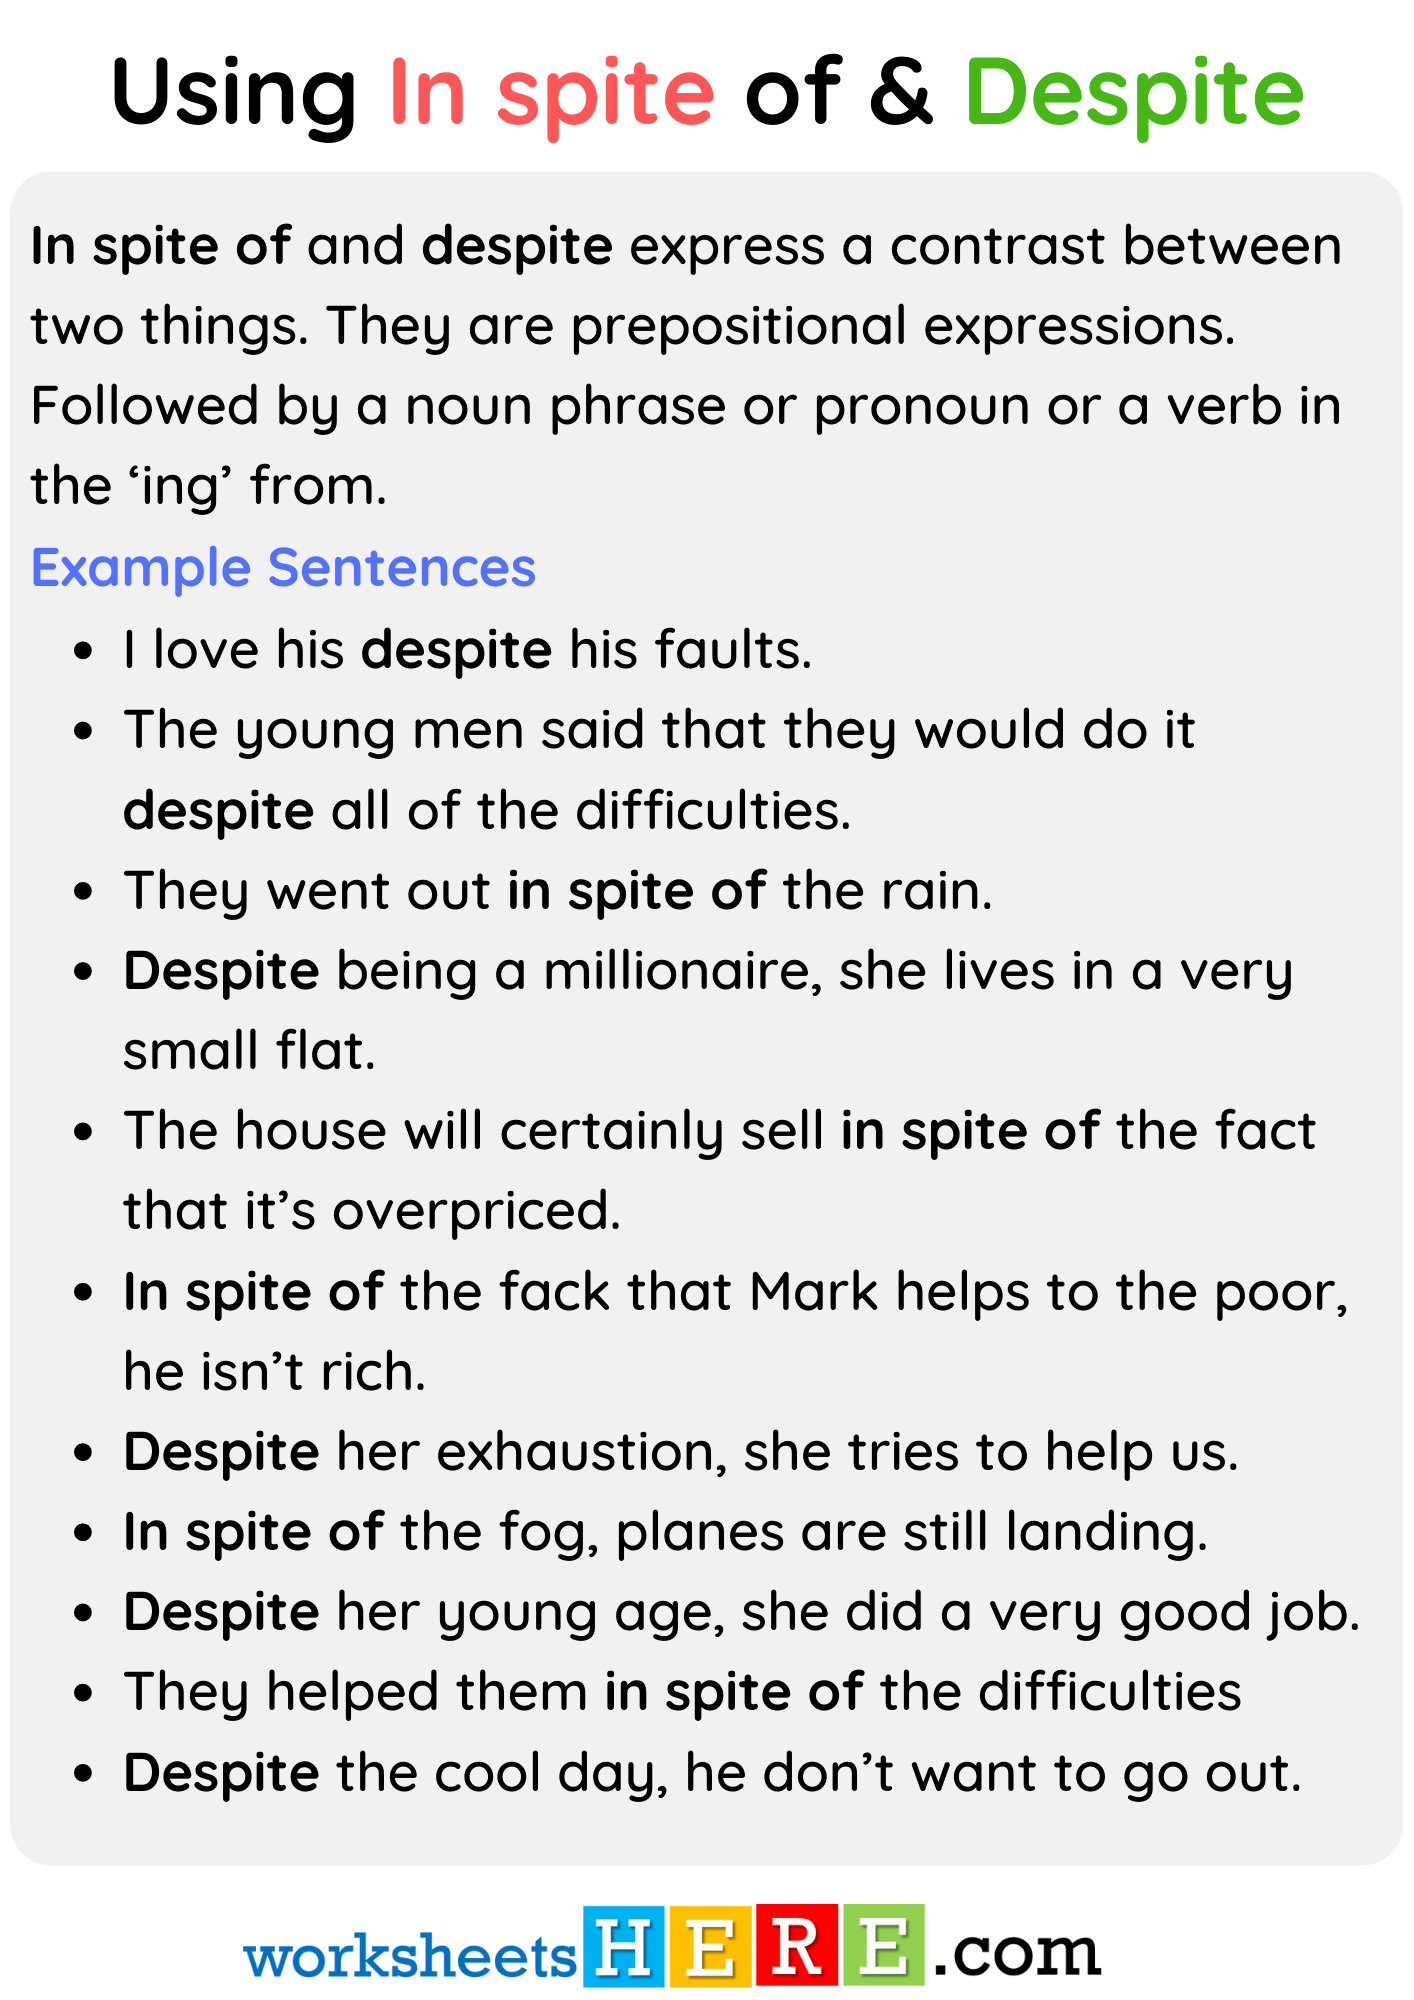 Using In spite of and Despite, Definition and Example Sentences PDF Worksheet